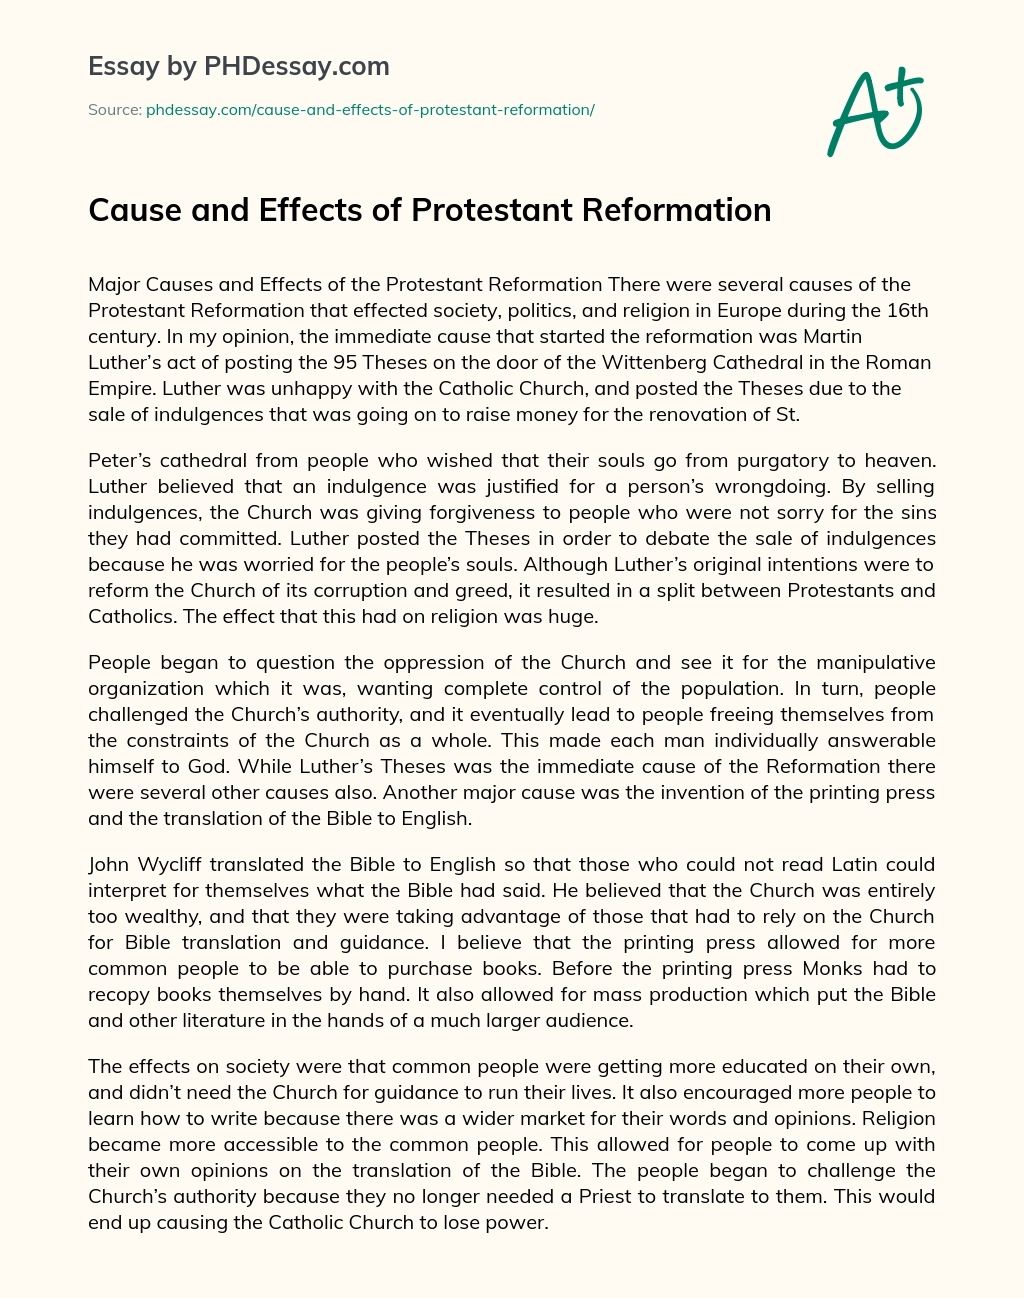 Cause and Effects of Protestant Reformation essay